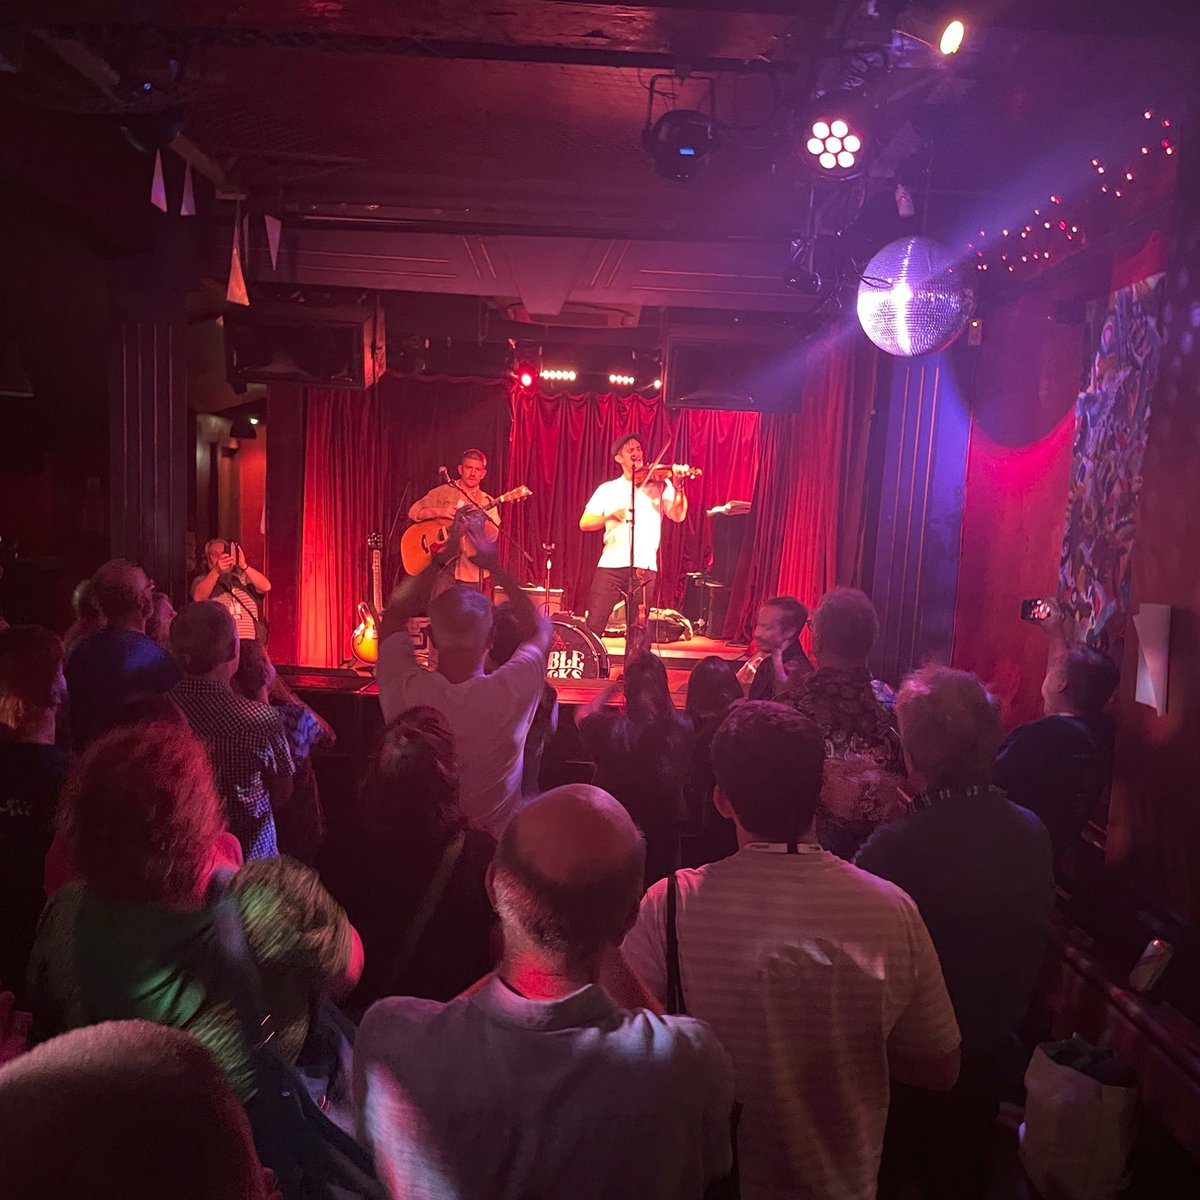 What an incredible first day at Manchester Folk Festival! We're off to dance the night away at Festival Club at @bandonthewall, we will see you all for more folk fun tomorrow!